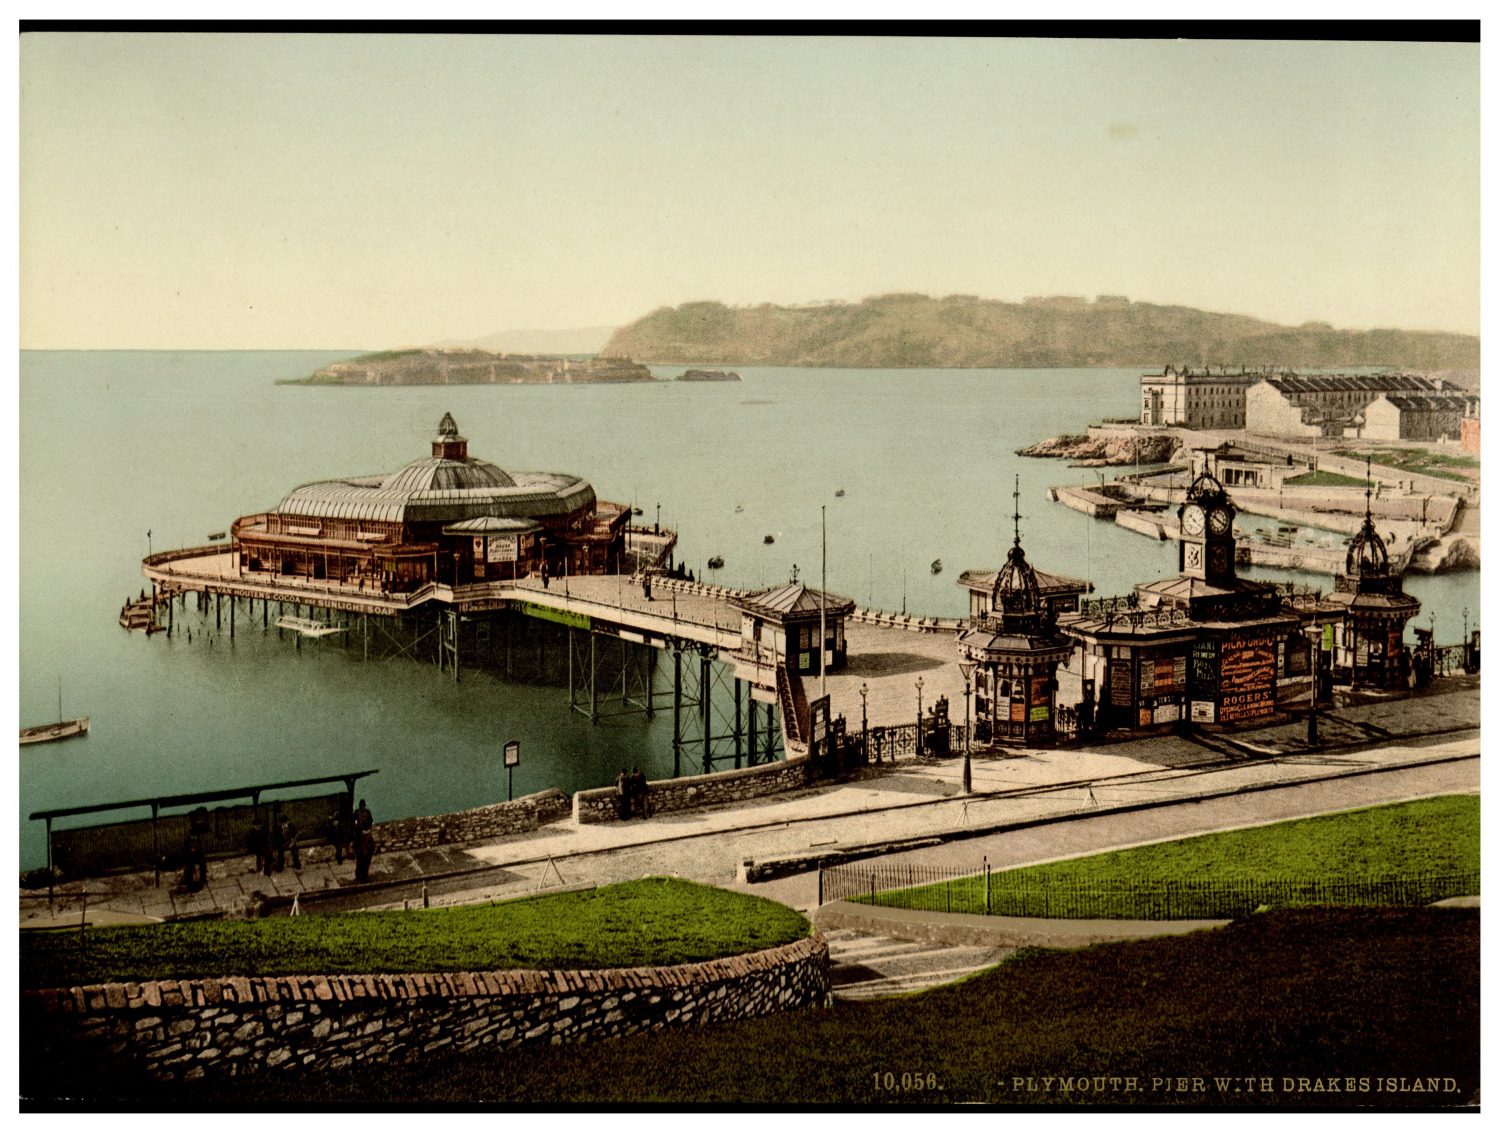 England. Plymouth. The Pier, with Drake's Island.  Vintage Photochrome by P.Z,